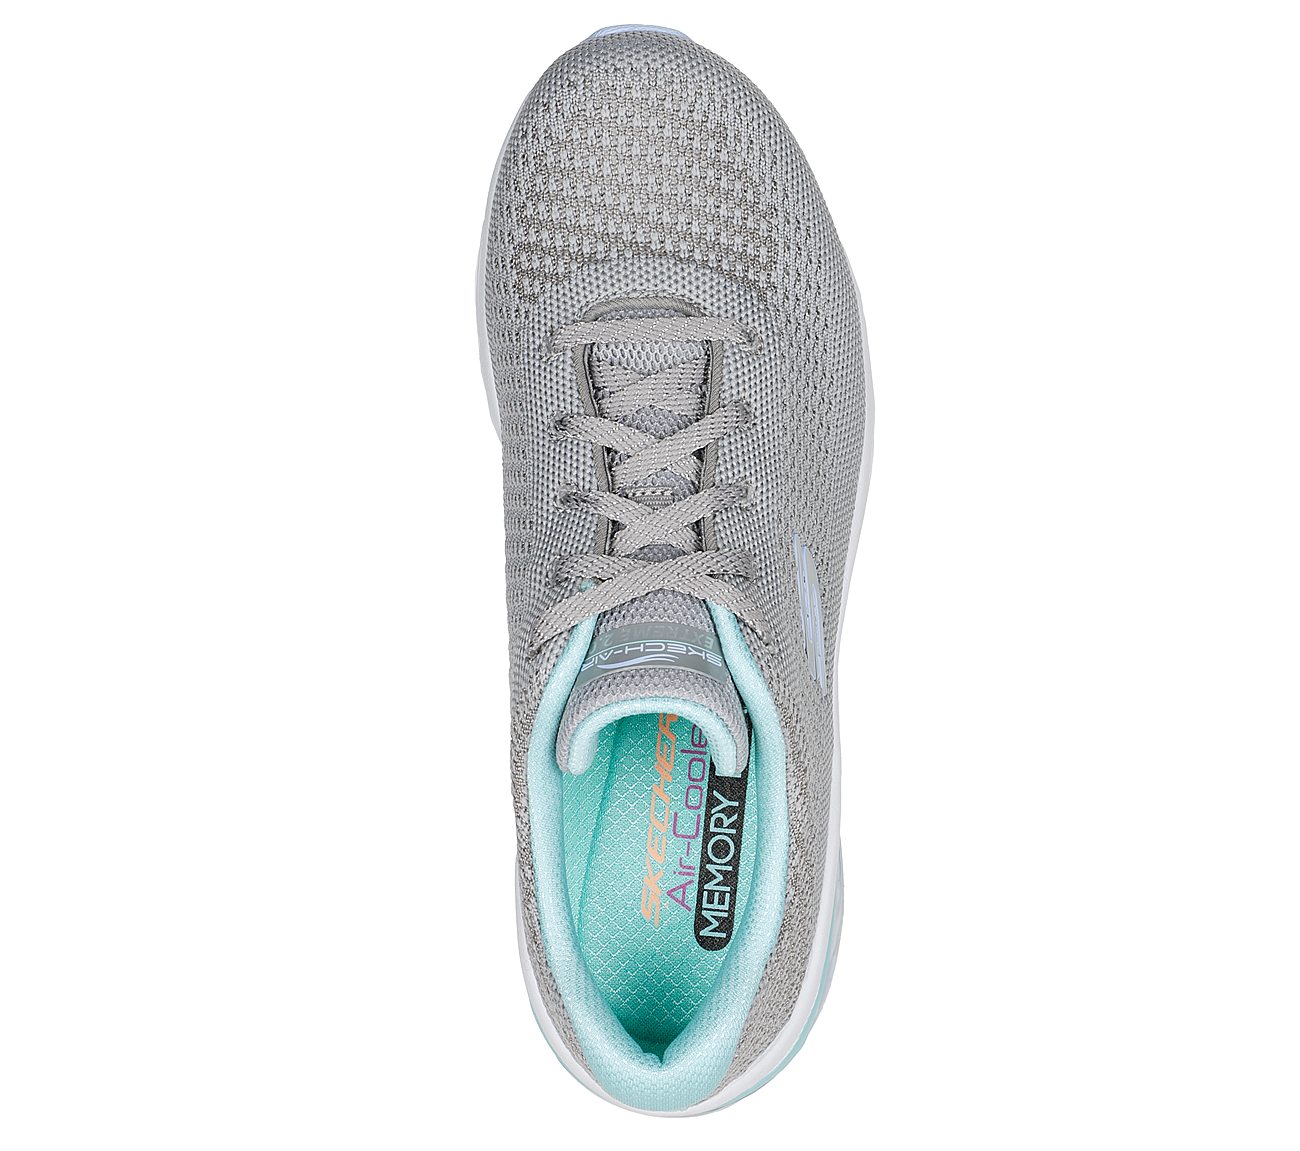 SKECH-AIR EXTREME 2.0-CLASSIC, GREY/MINT Footwear Top View